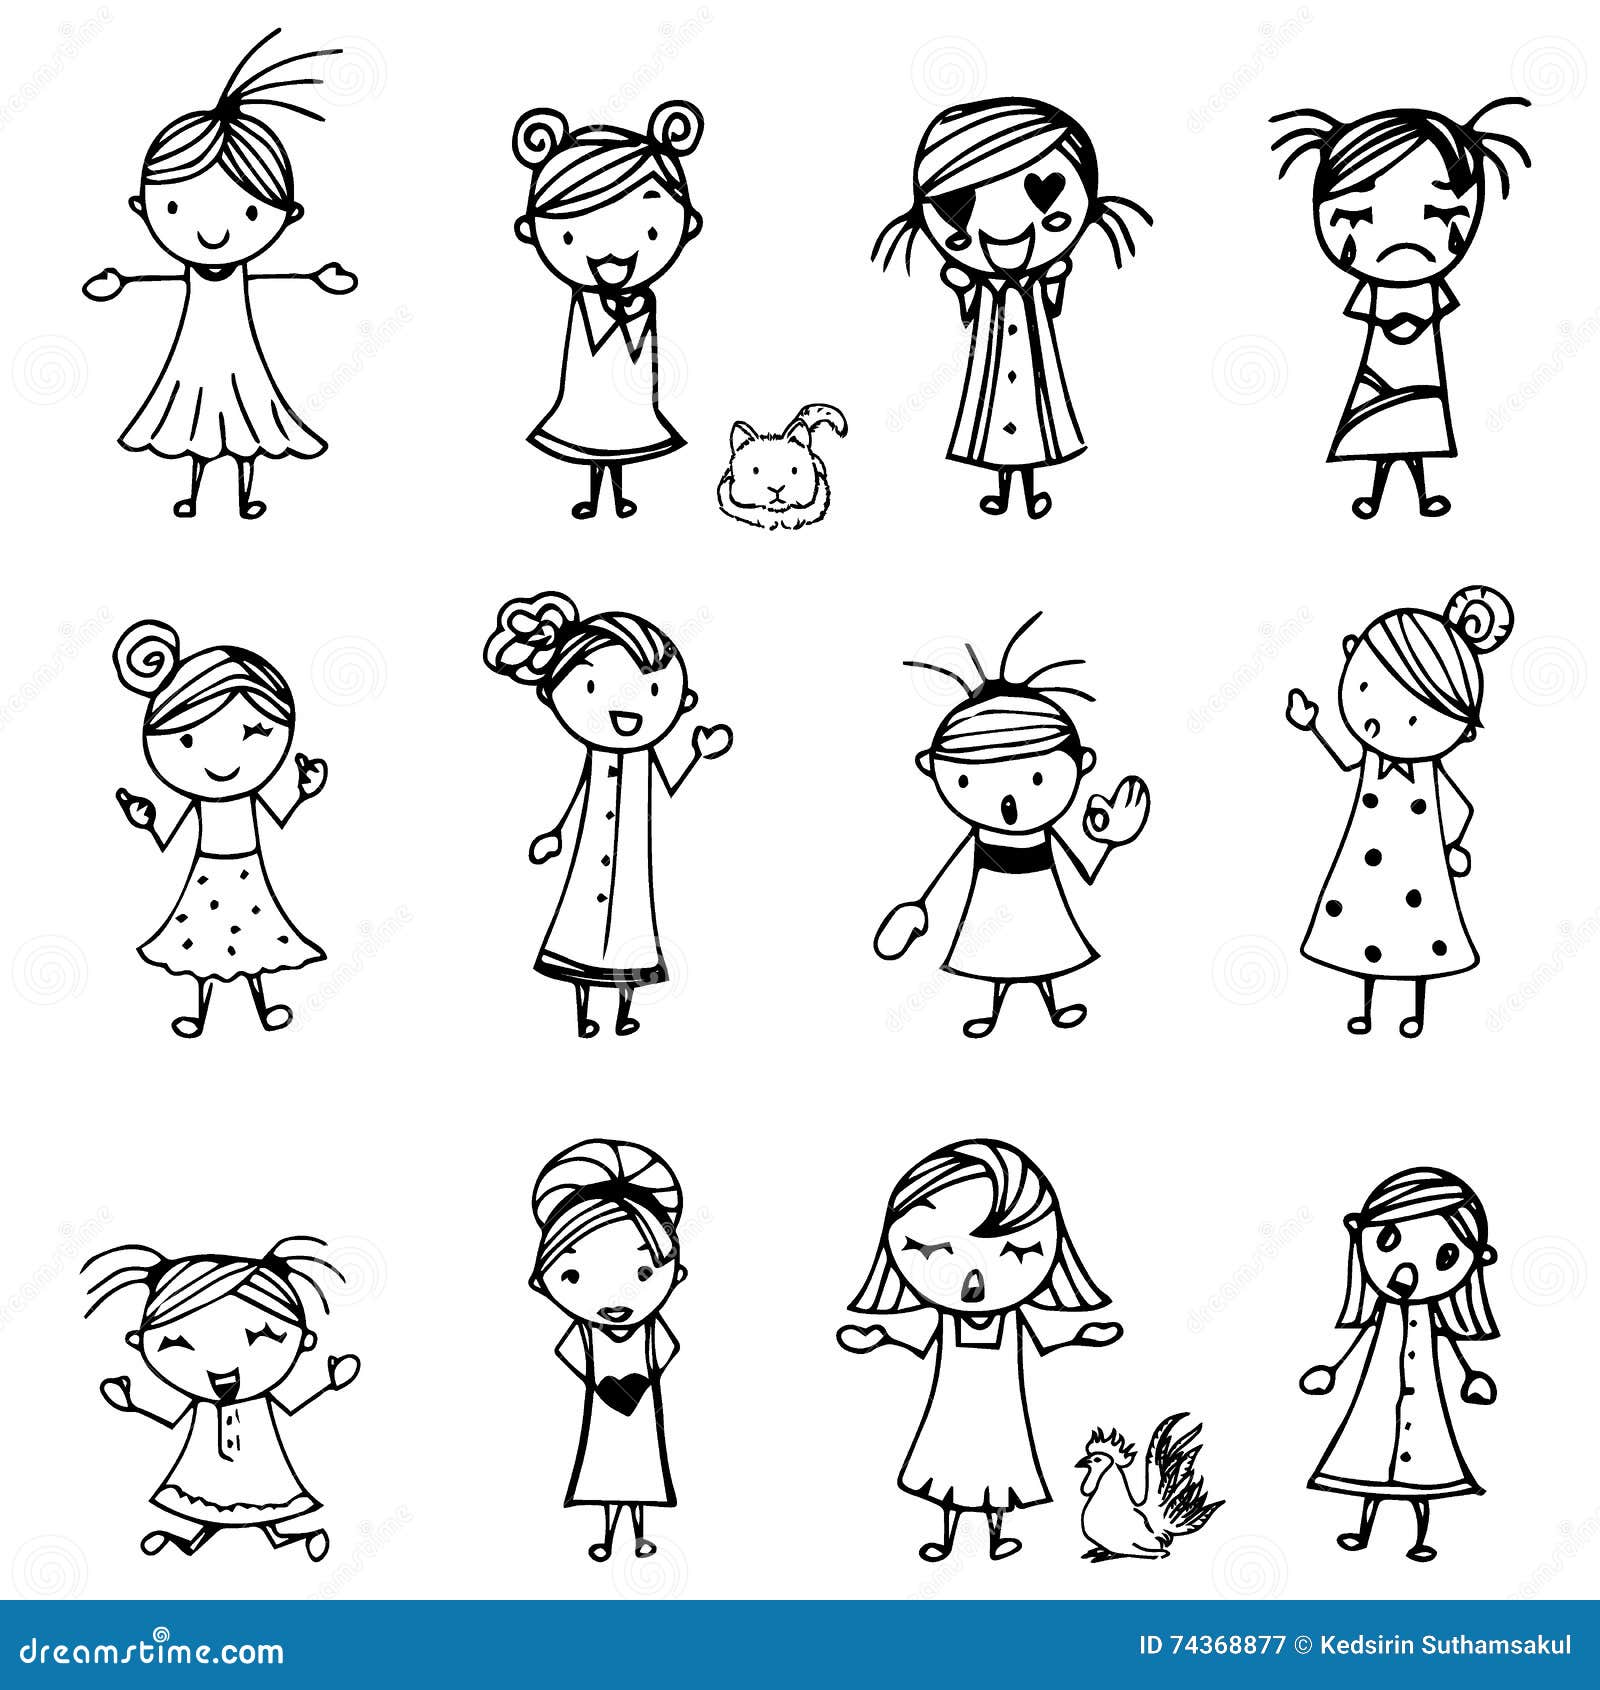 👧How To Draw A Girl Step-by-Step? Cute Girl Drawing Easy